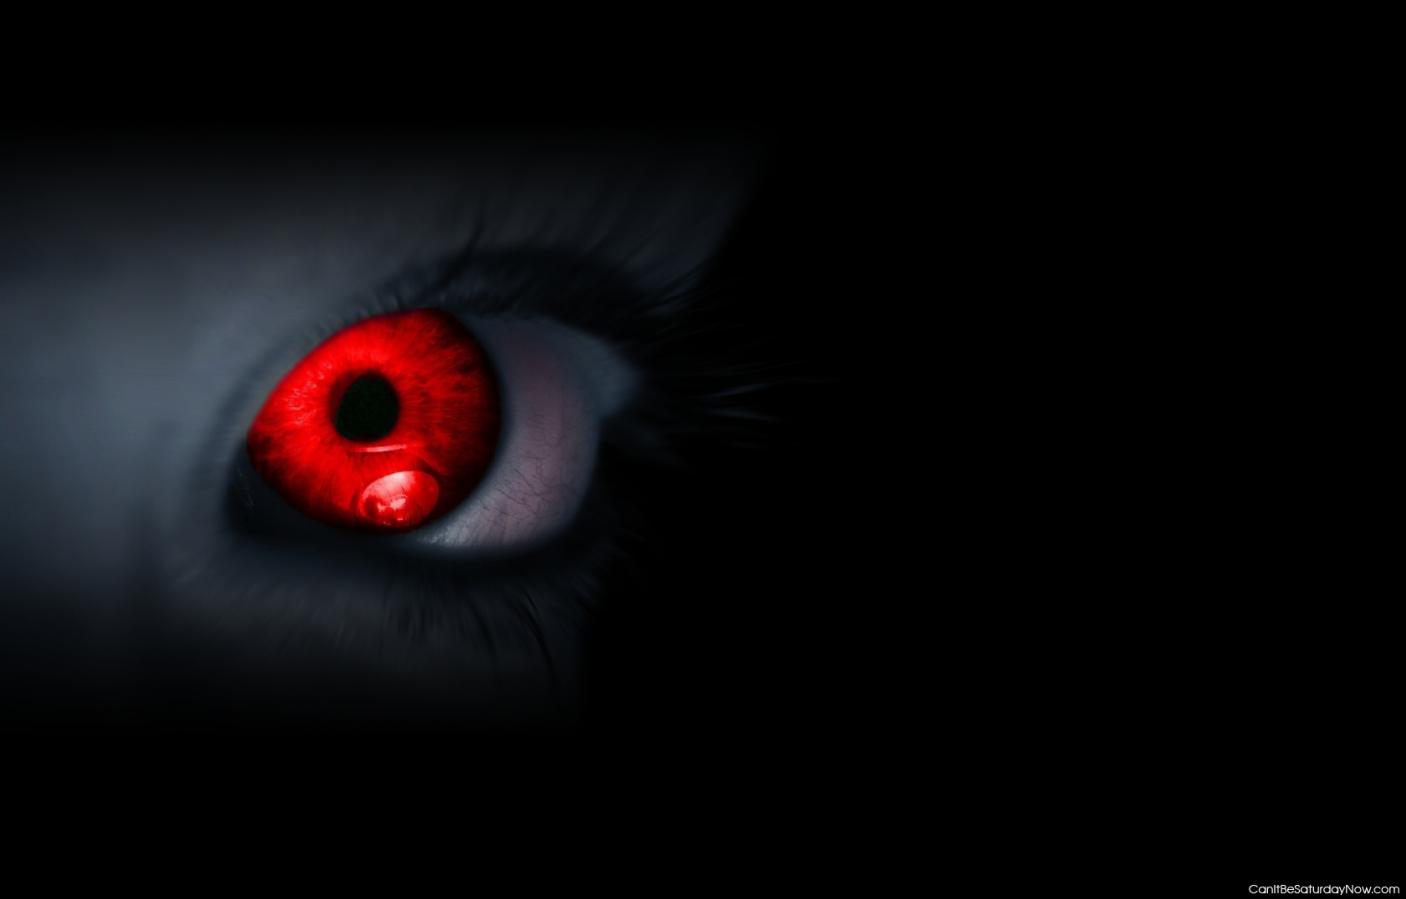 Red eye and black - funky cool background